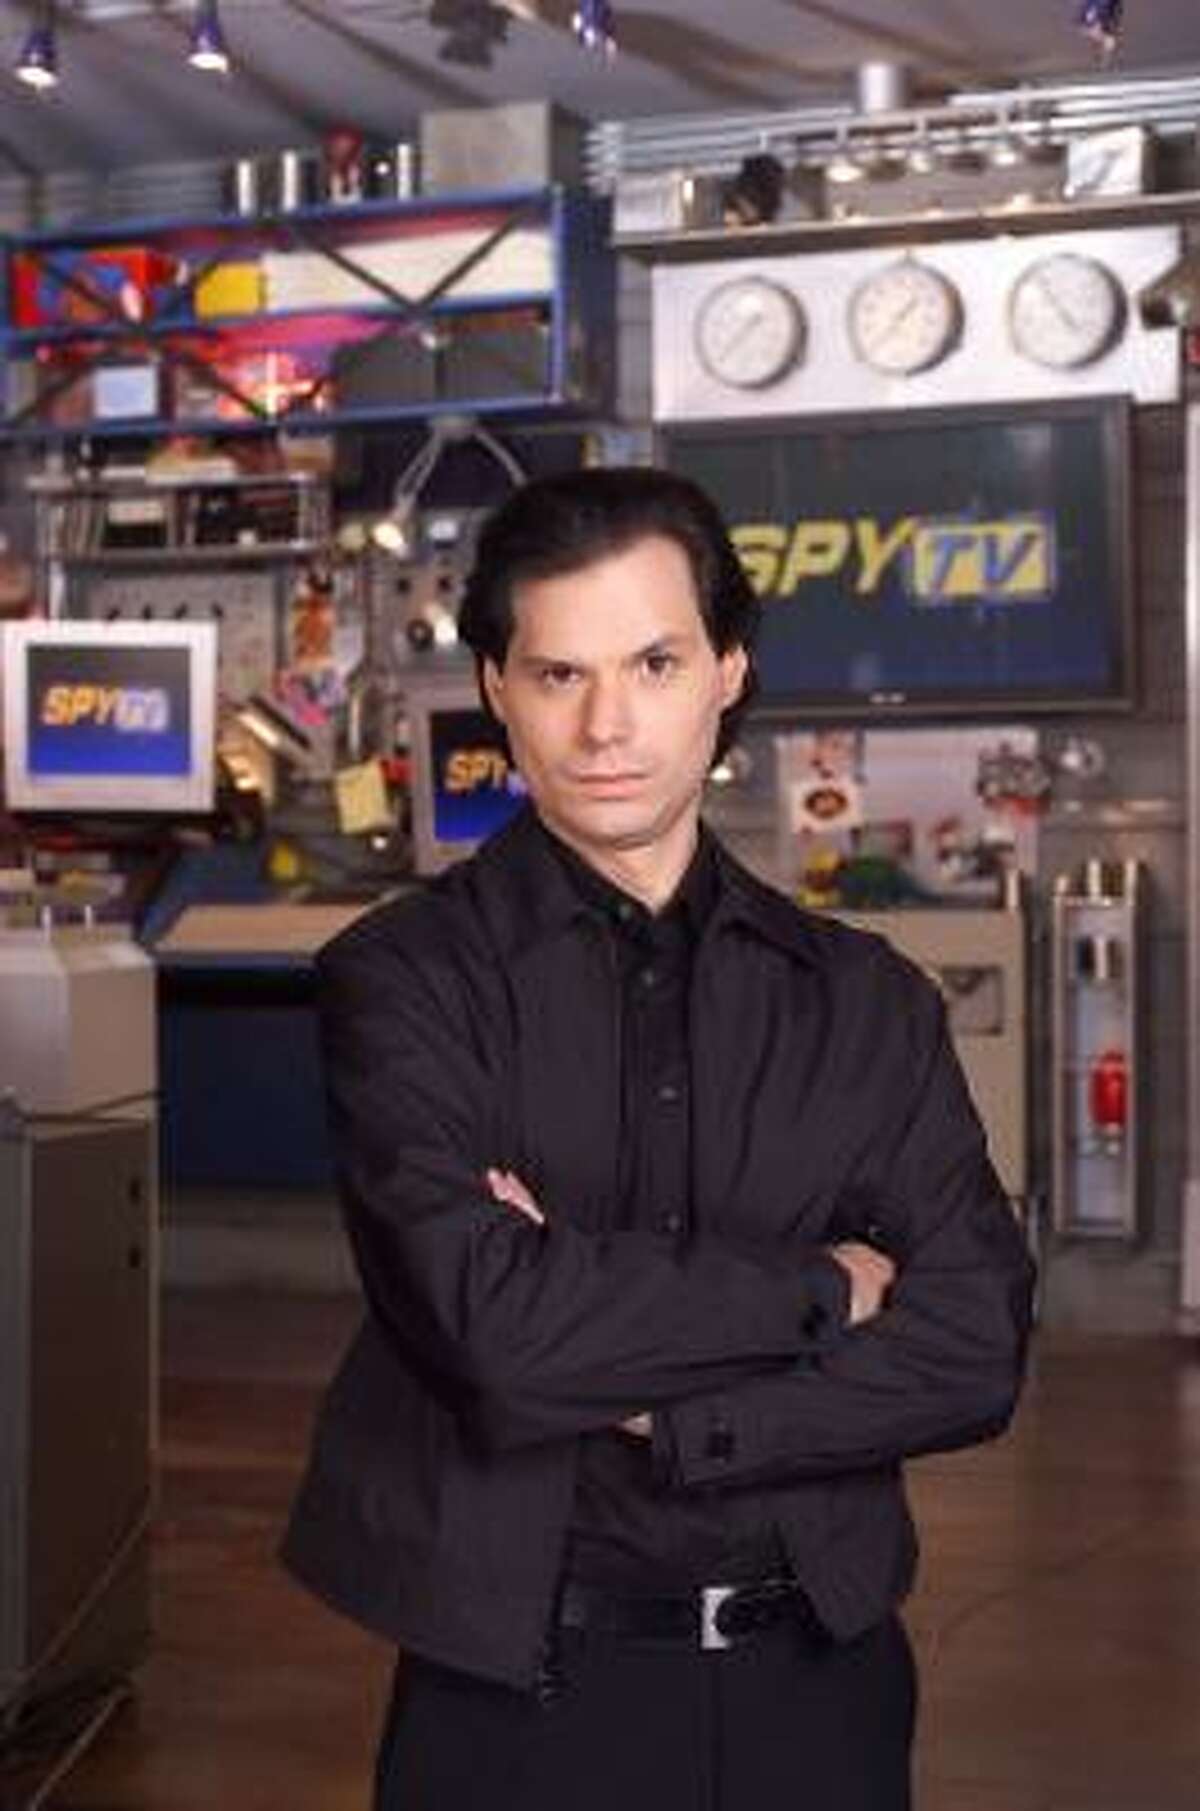 michaelianblack : "Not sure why Michael Jackson movie is only rated PG. There are less scary creatures in the new "Saw" movie."